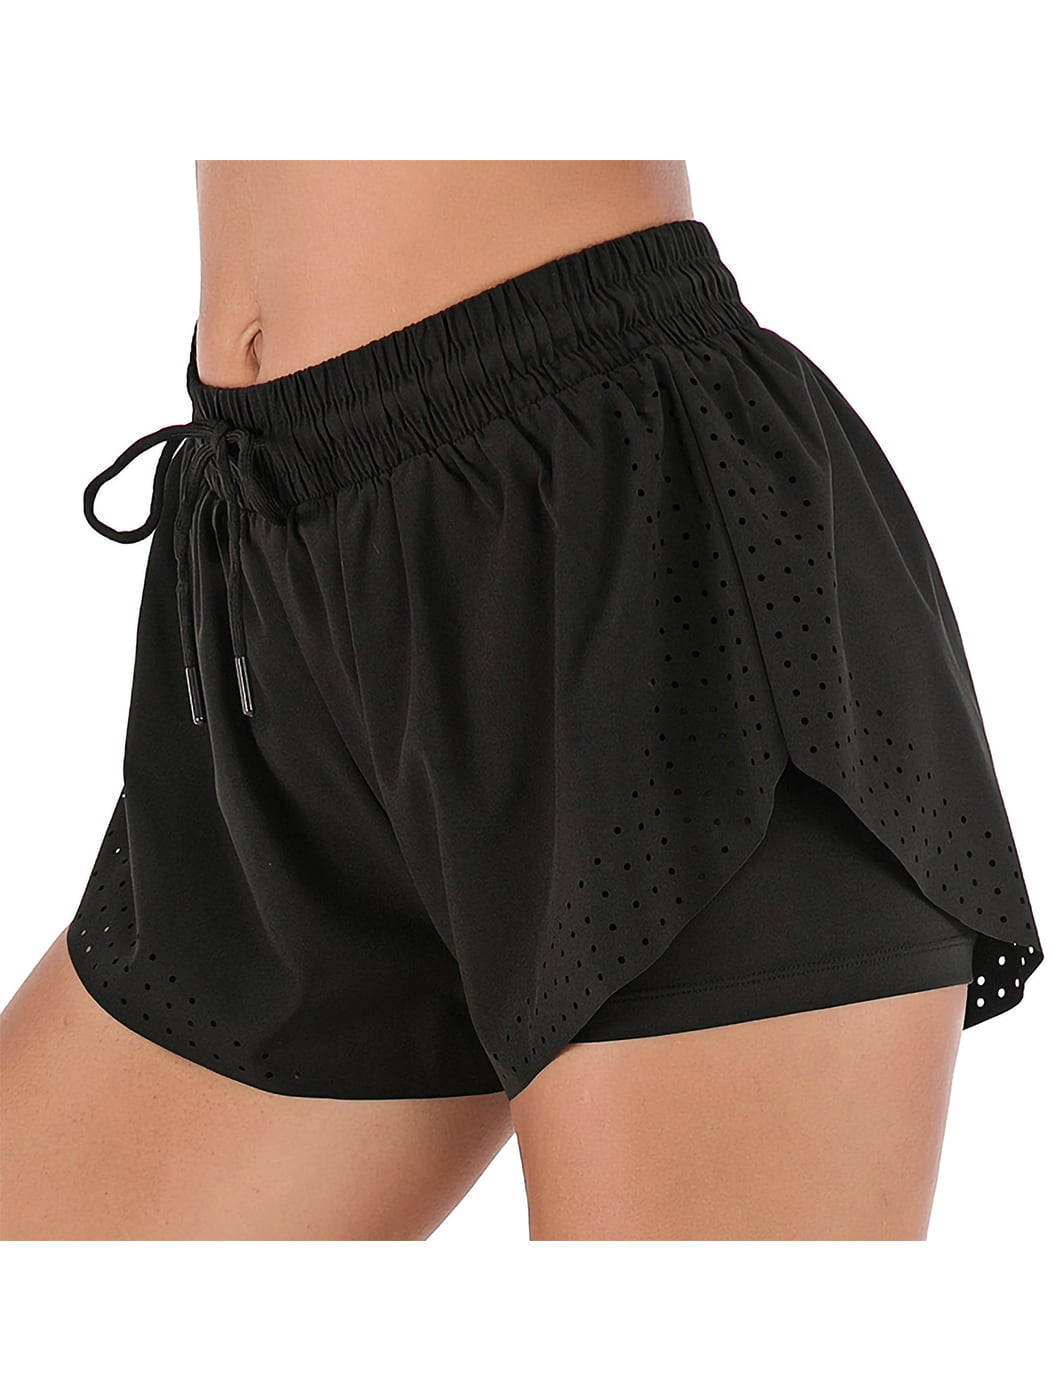 Women's Running Shorts Double Layer Fitness Workout Athletic